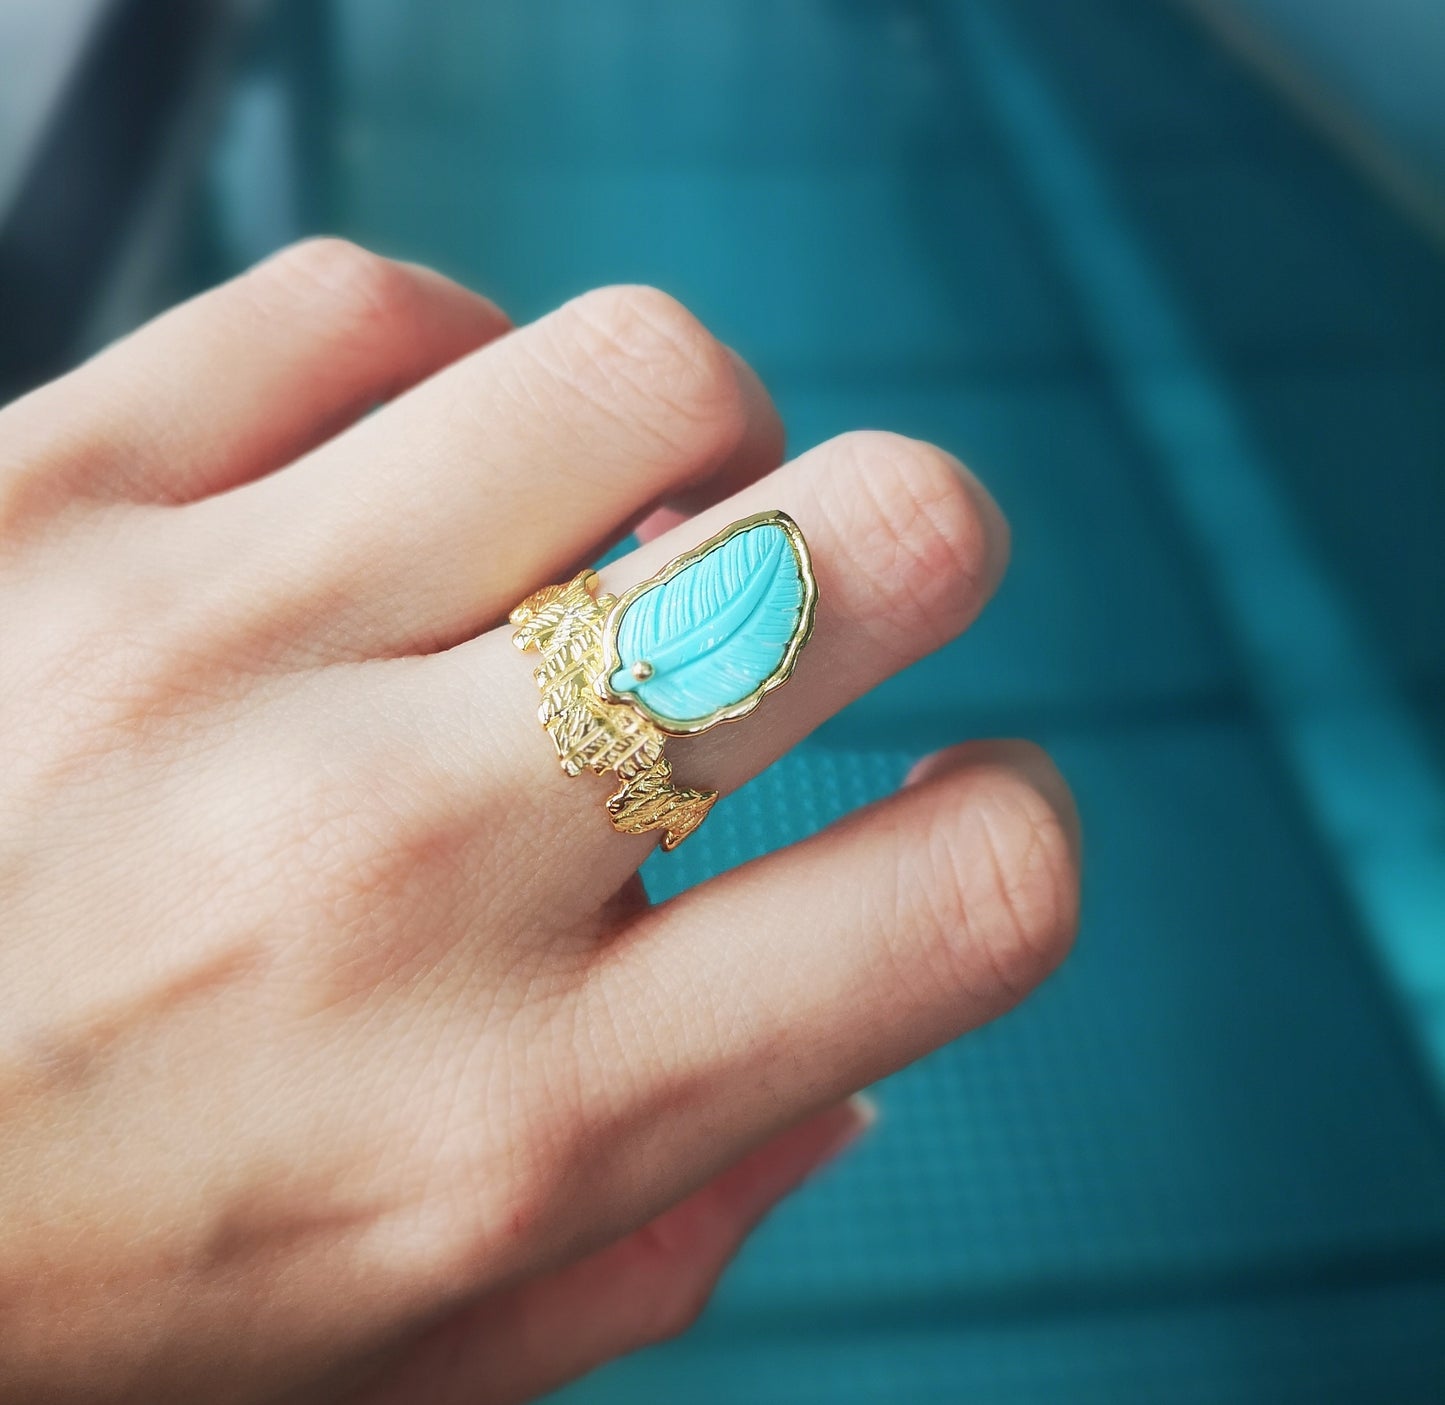 The Tree Memory Natural Turquoise Engraved Leaves Ring